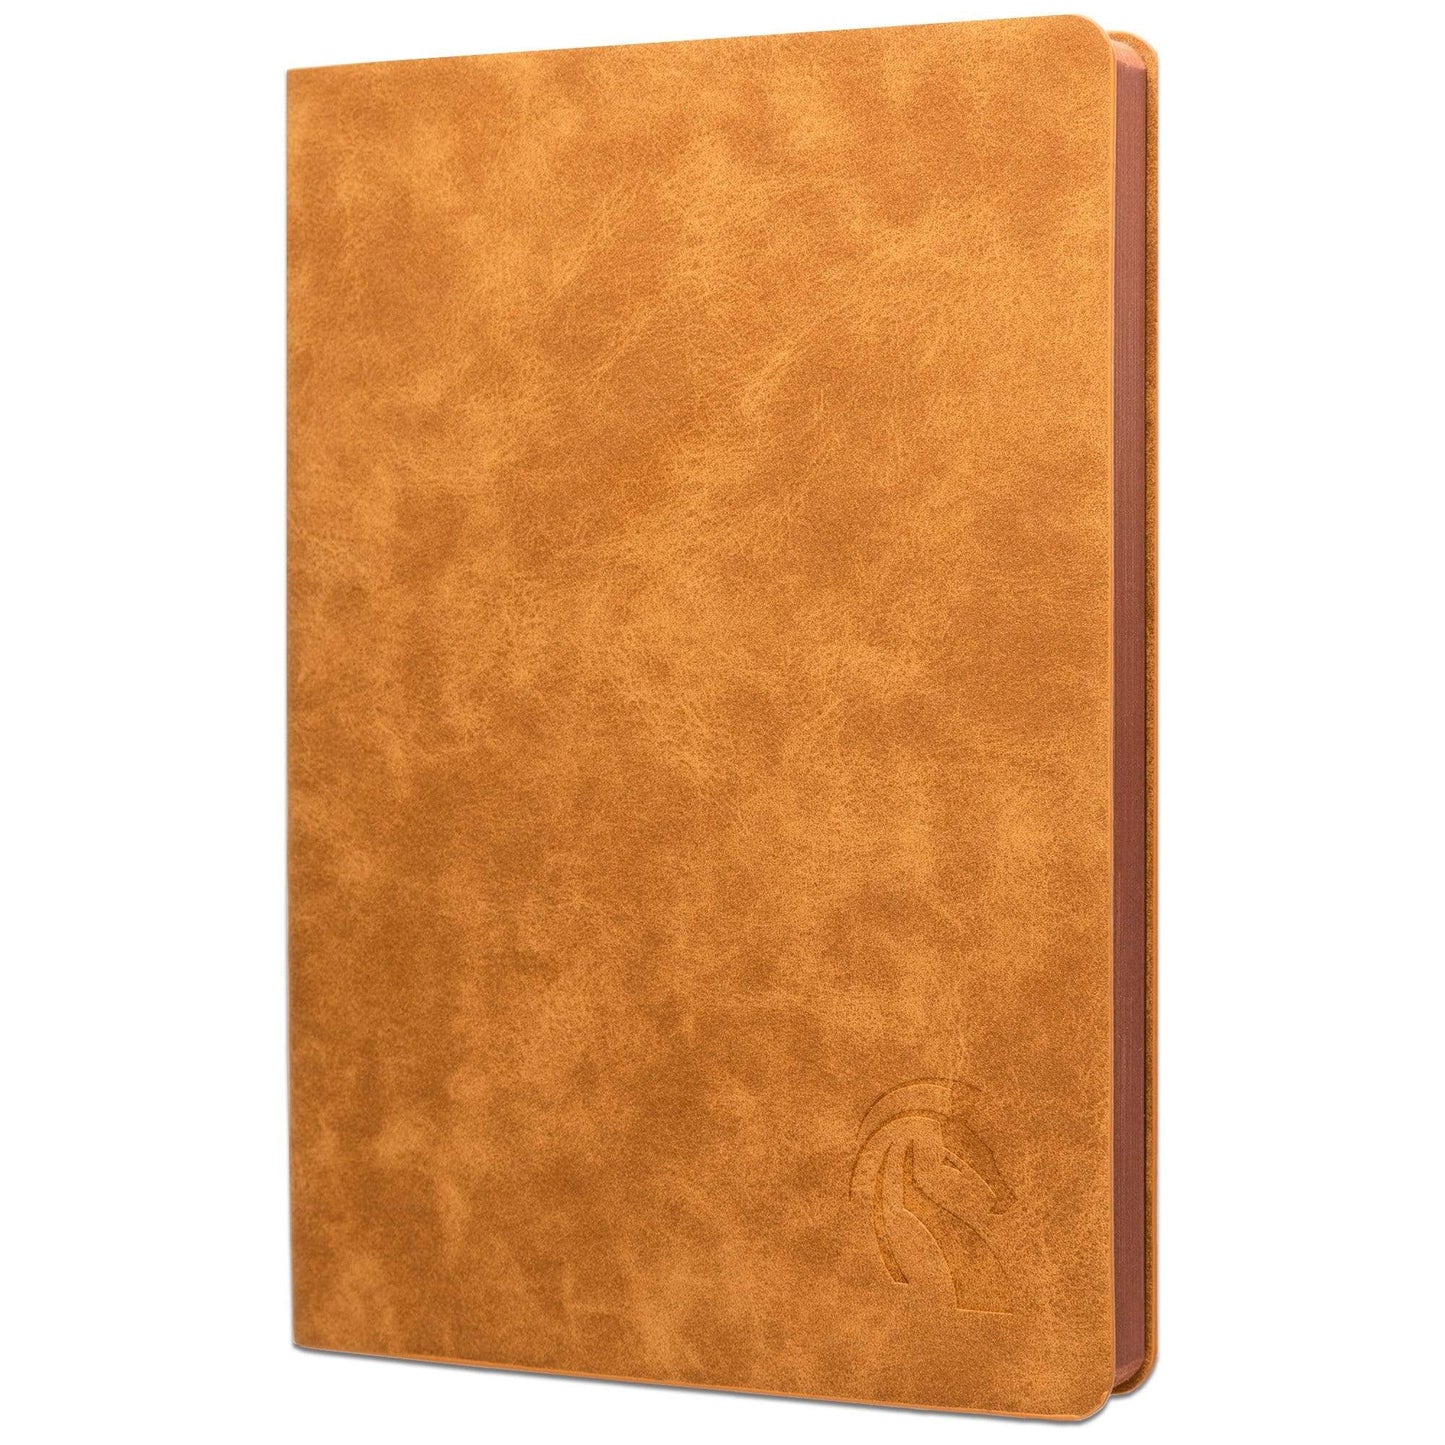 LeStallion Soft Cover Dotted Leather Notebook - A5 Professional Bullet Leather Journal - Light Brown - LeStallion